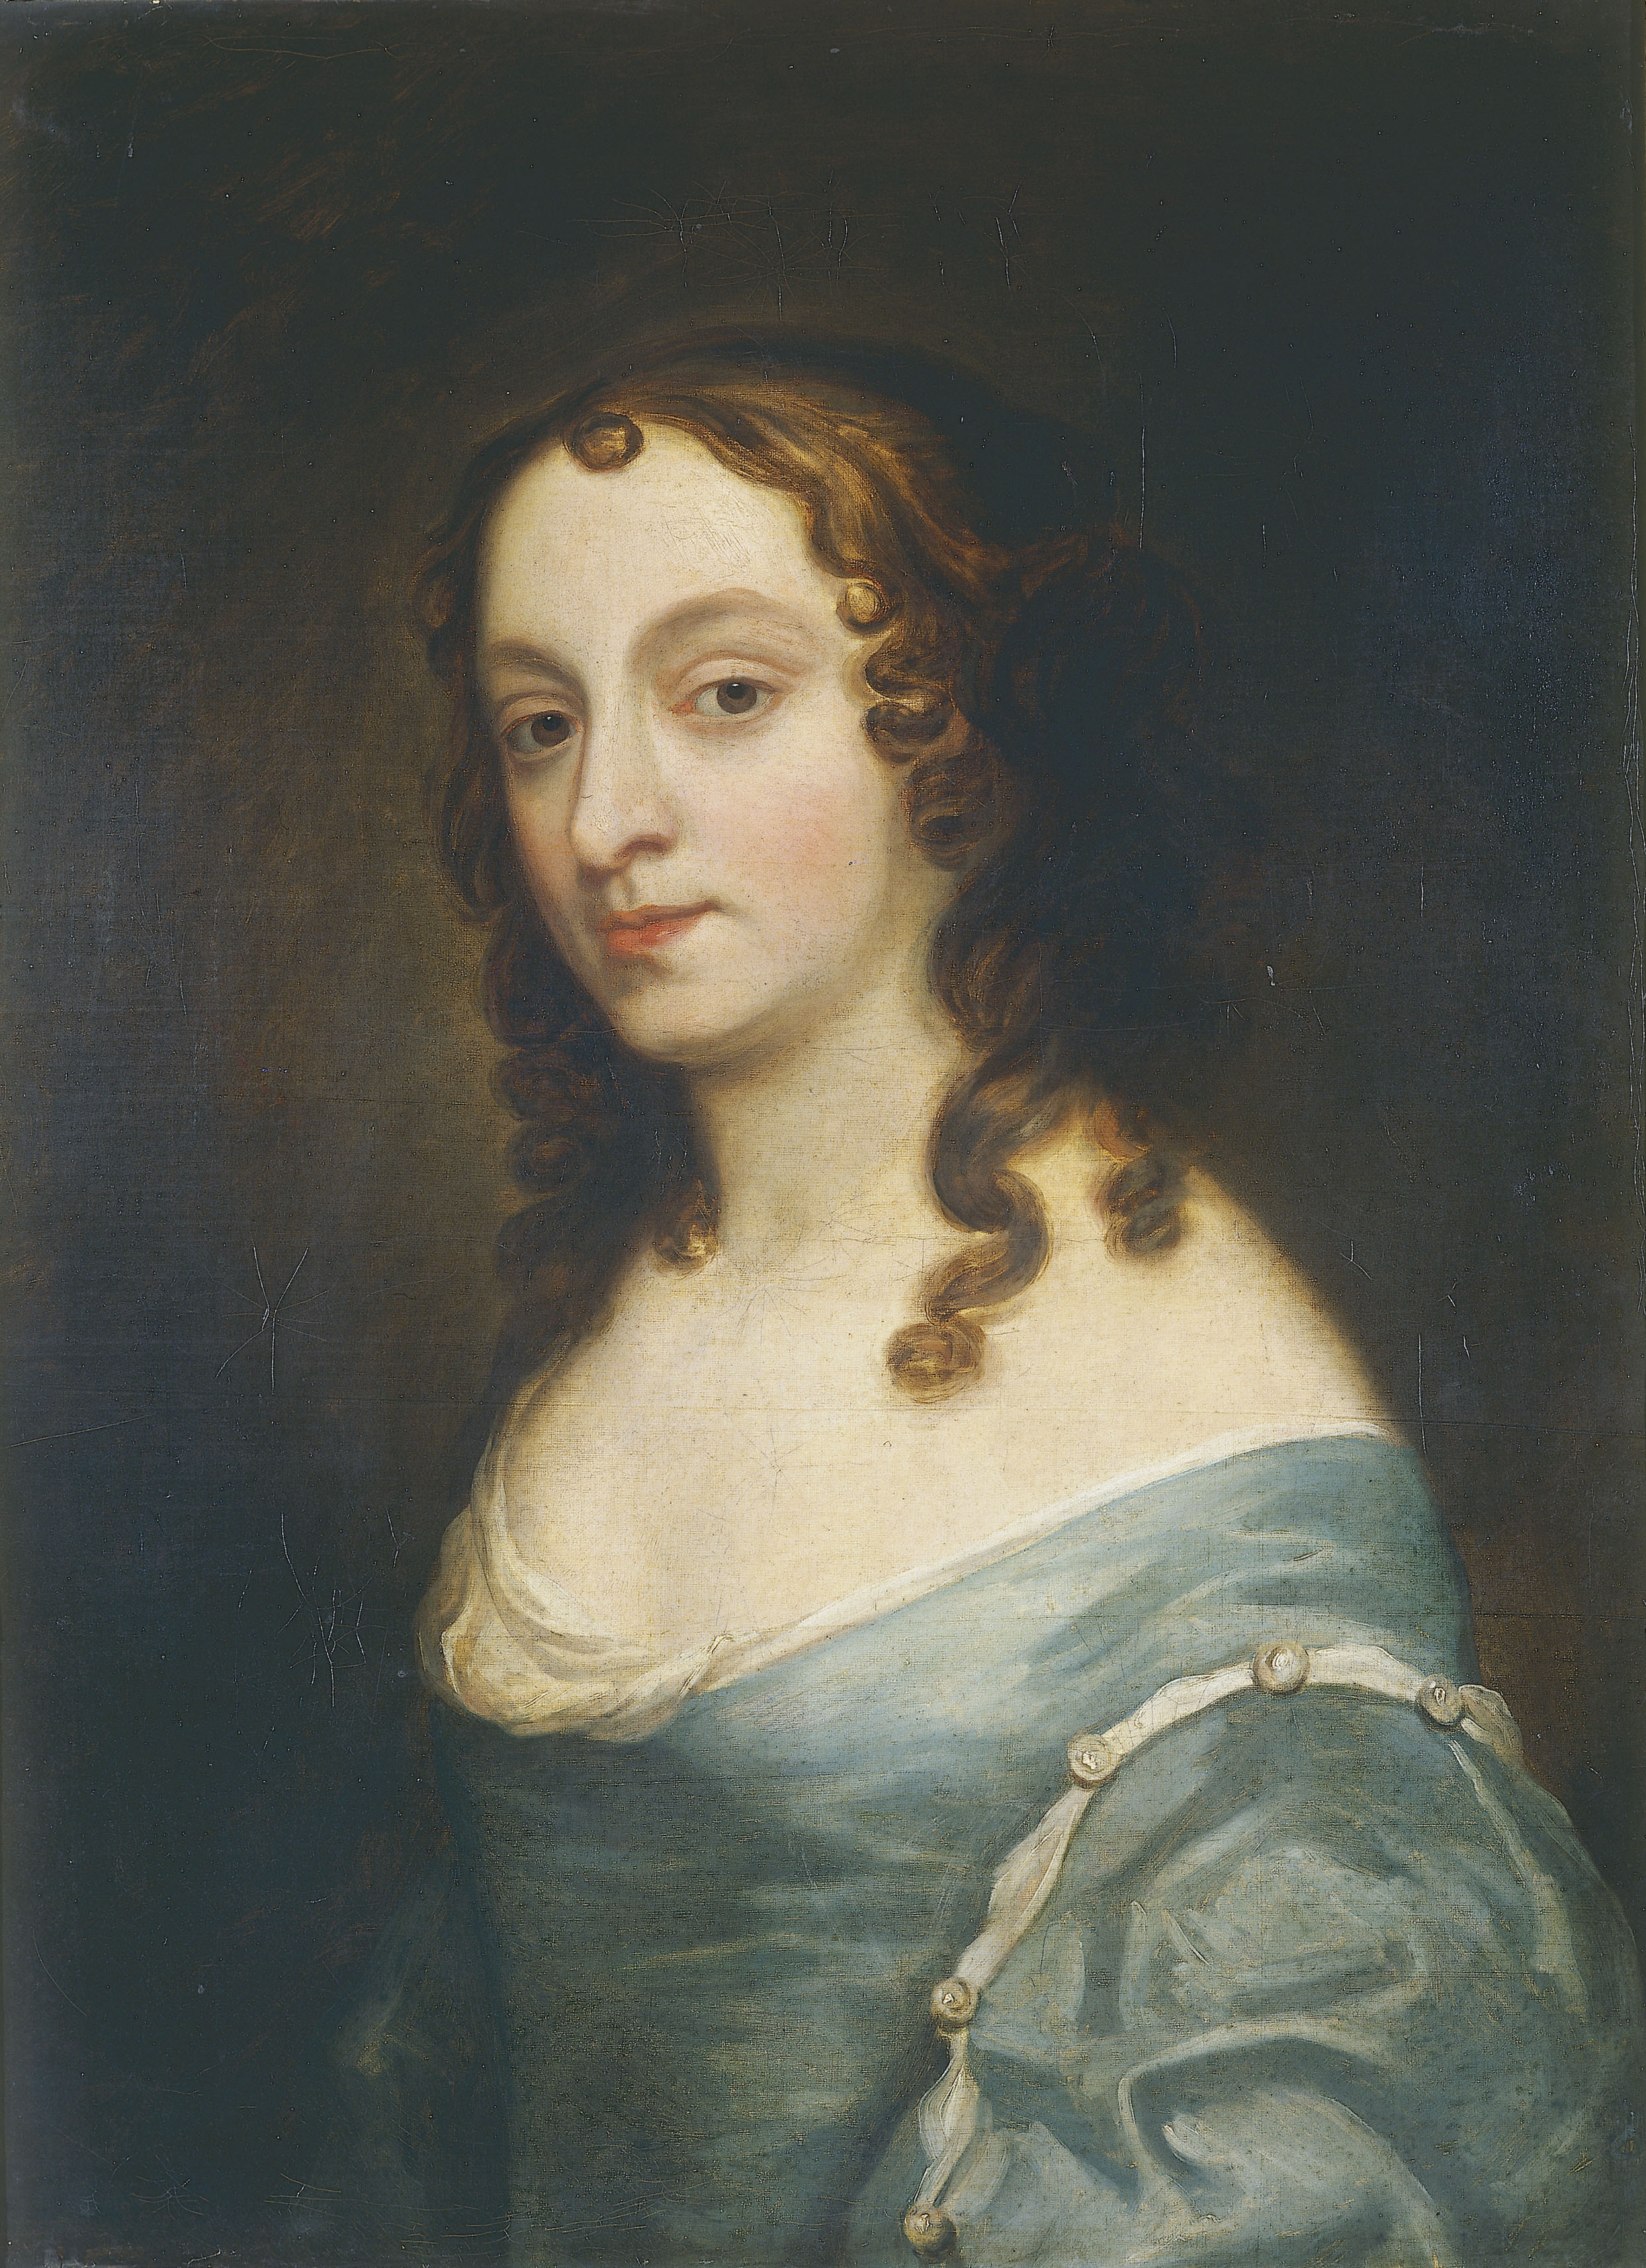 Portrait of Elizabeth Claypole (Cromwell), circle of Sir Peter Lely, c. 1655, Oil on Canvas. thumbnail